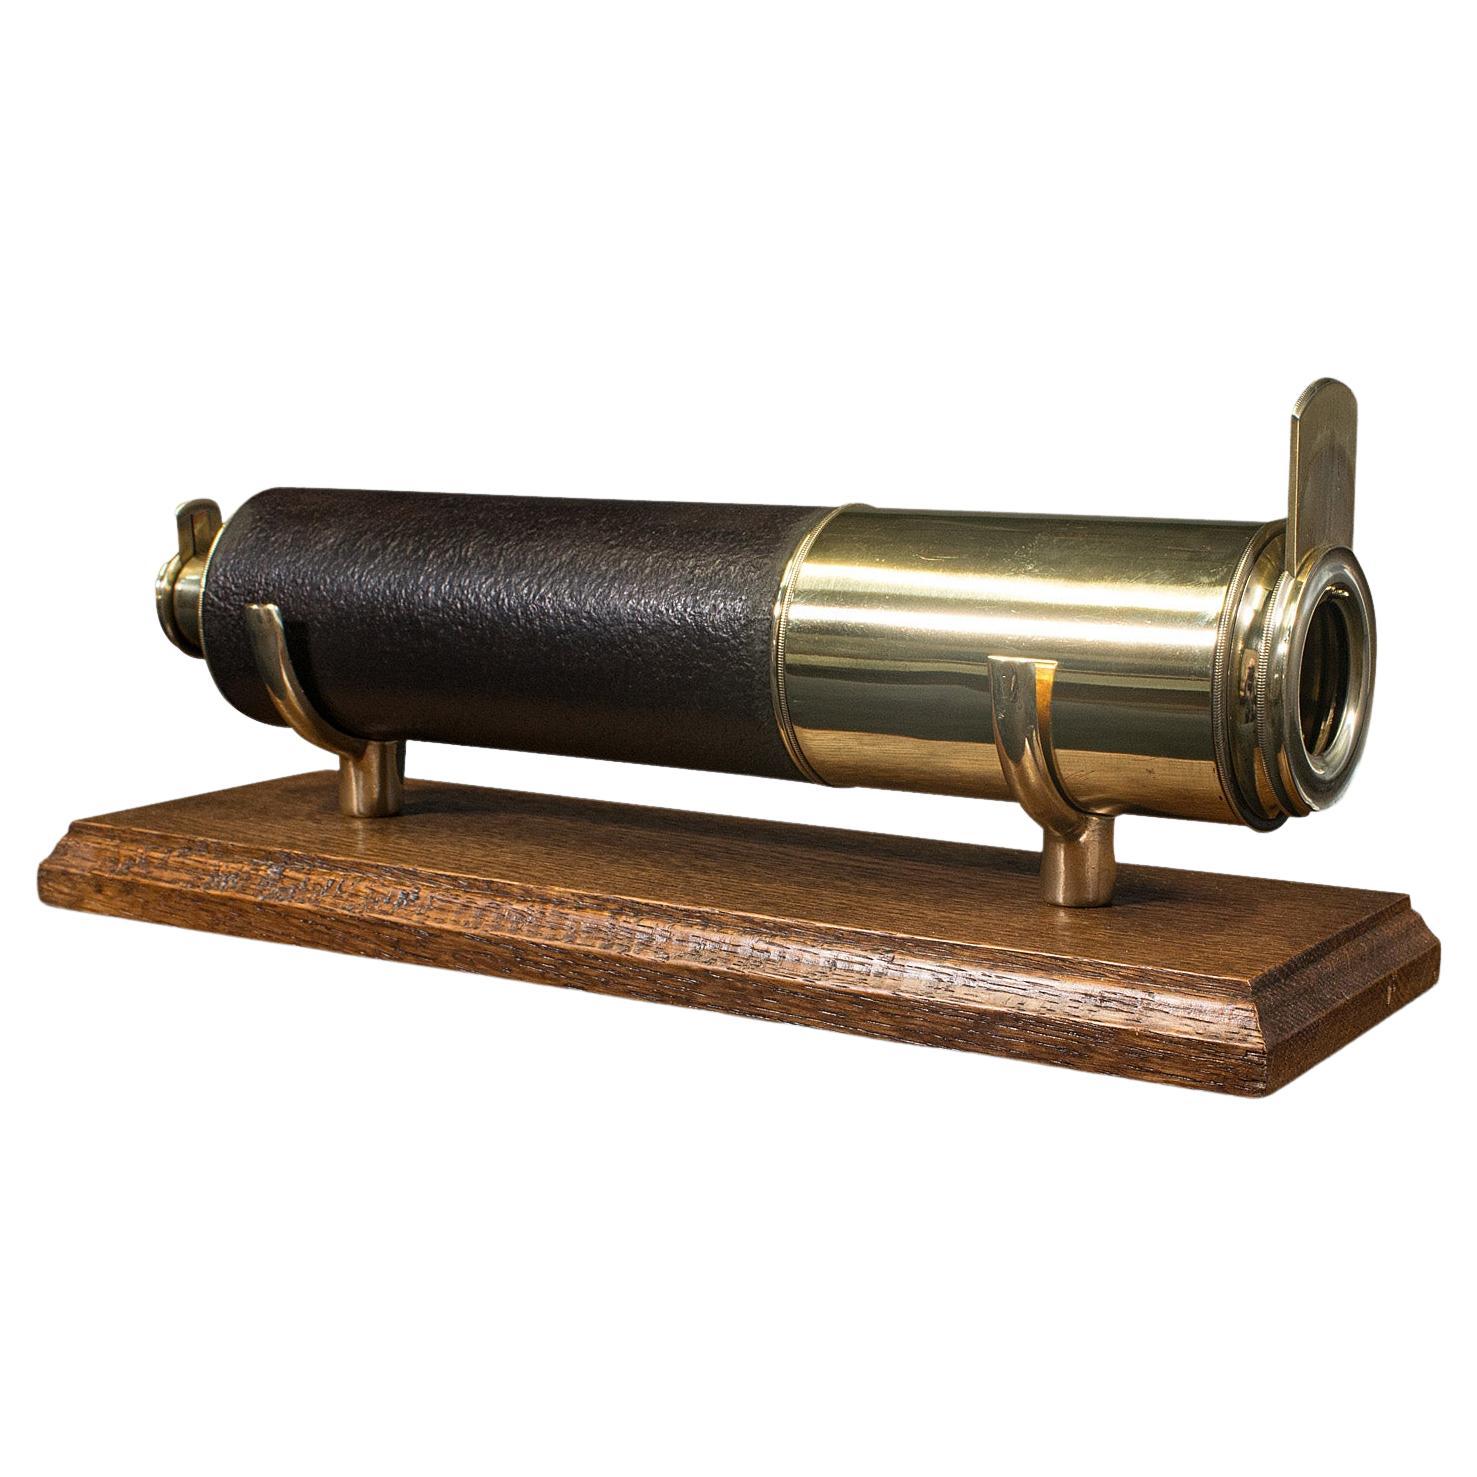 Antique 3 Draw Telescope, English, Brass, Leather, Terrestrial, Victorian, 1870 For Sale